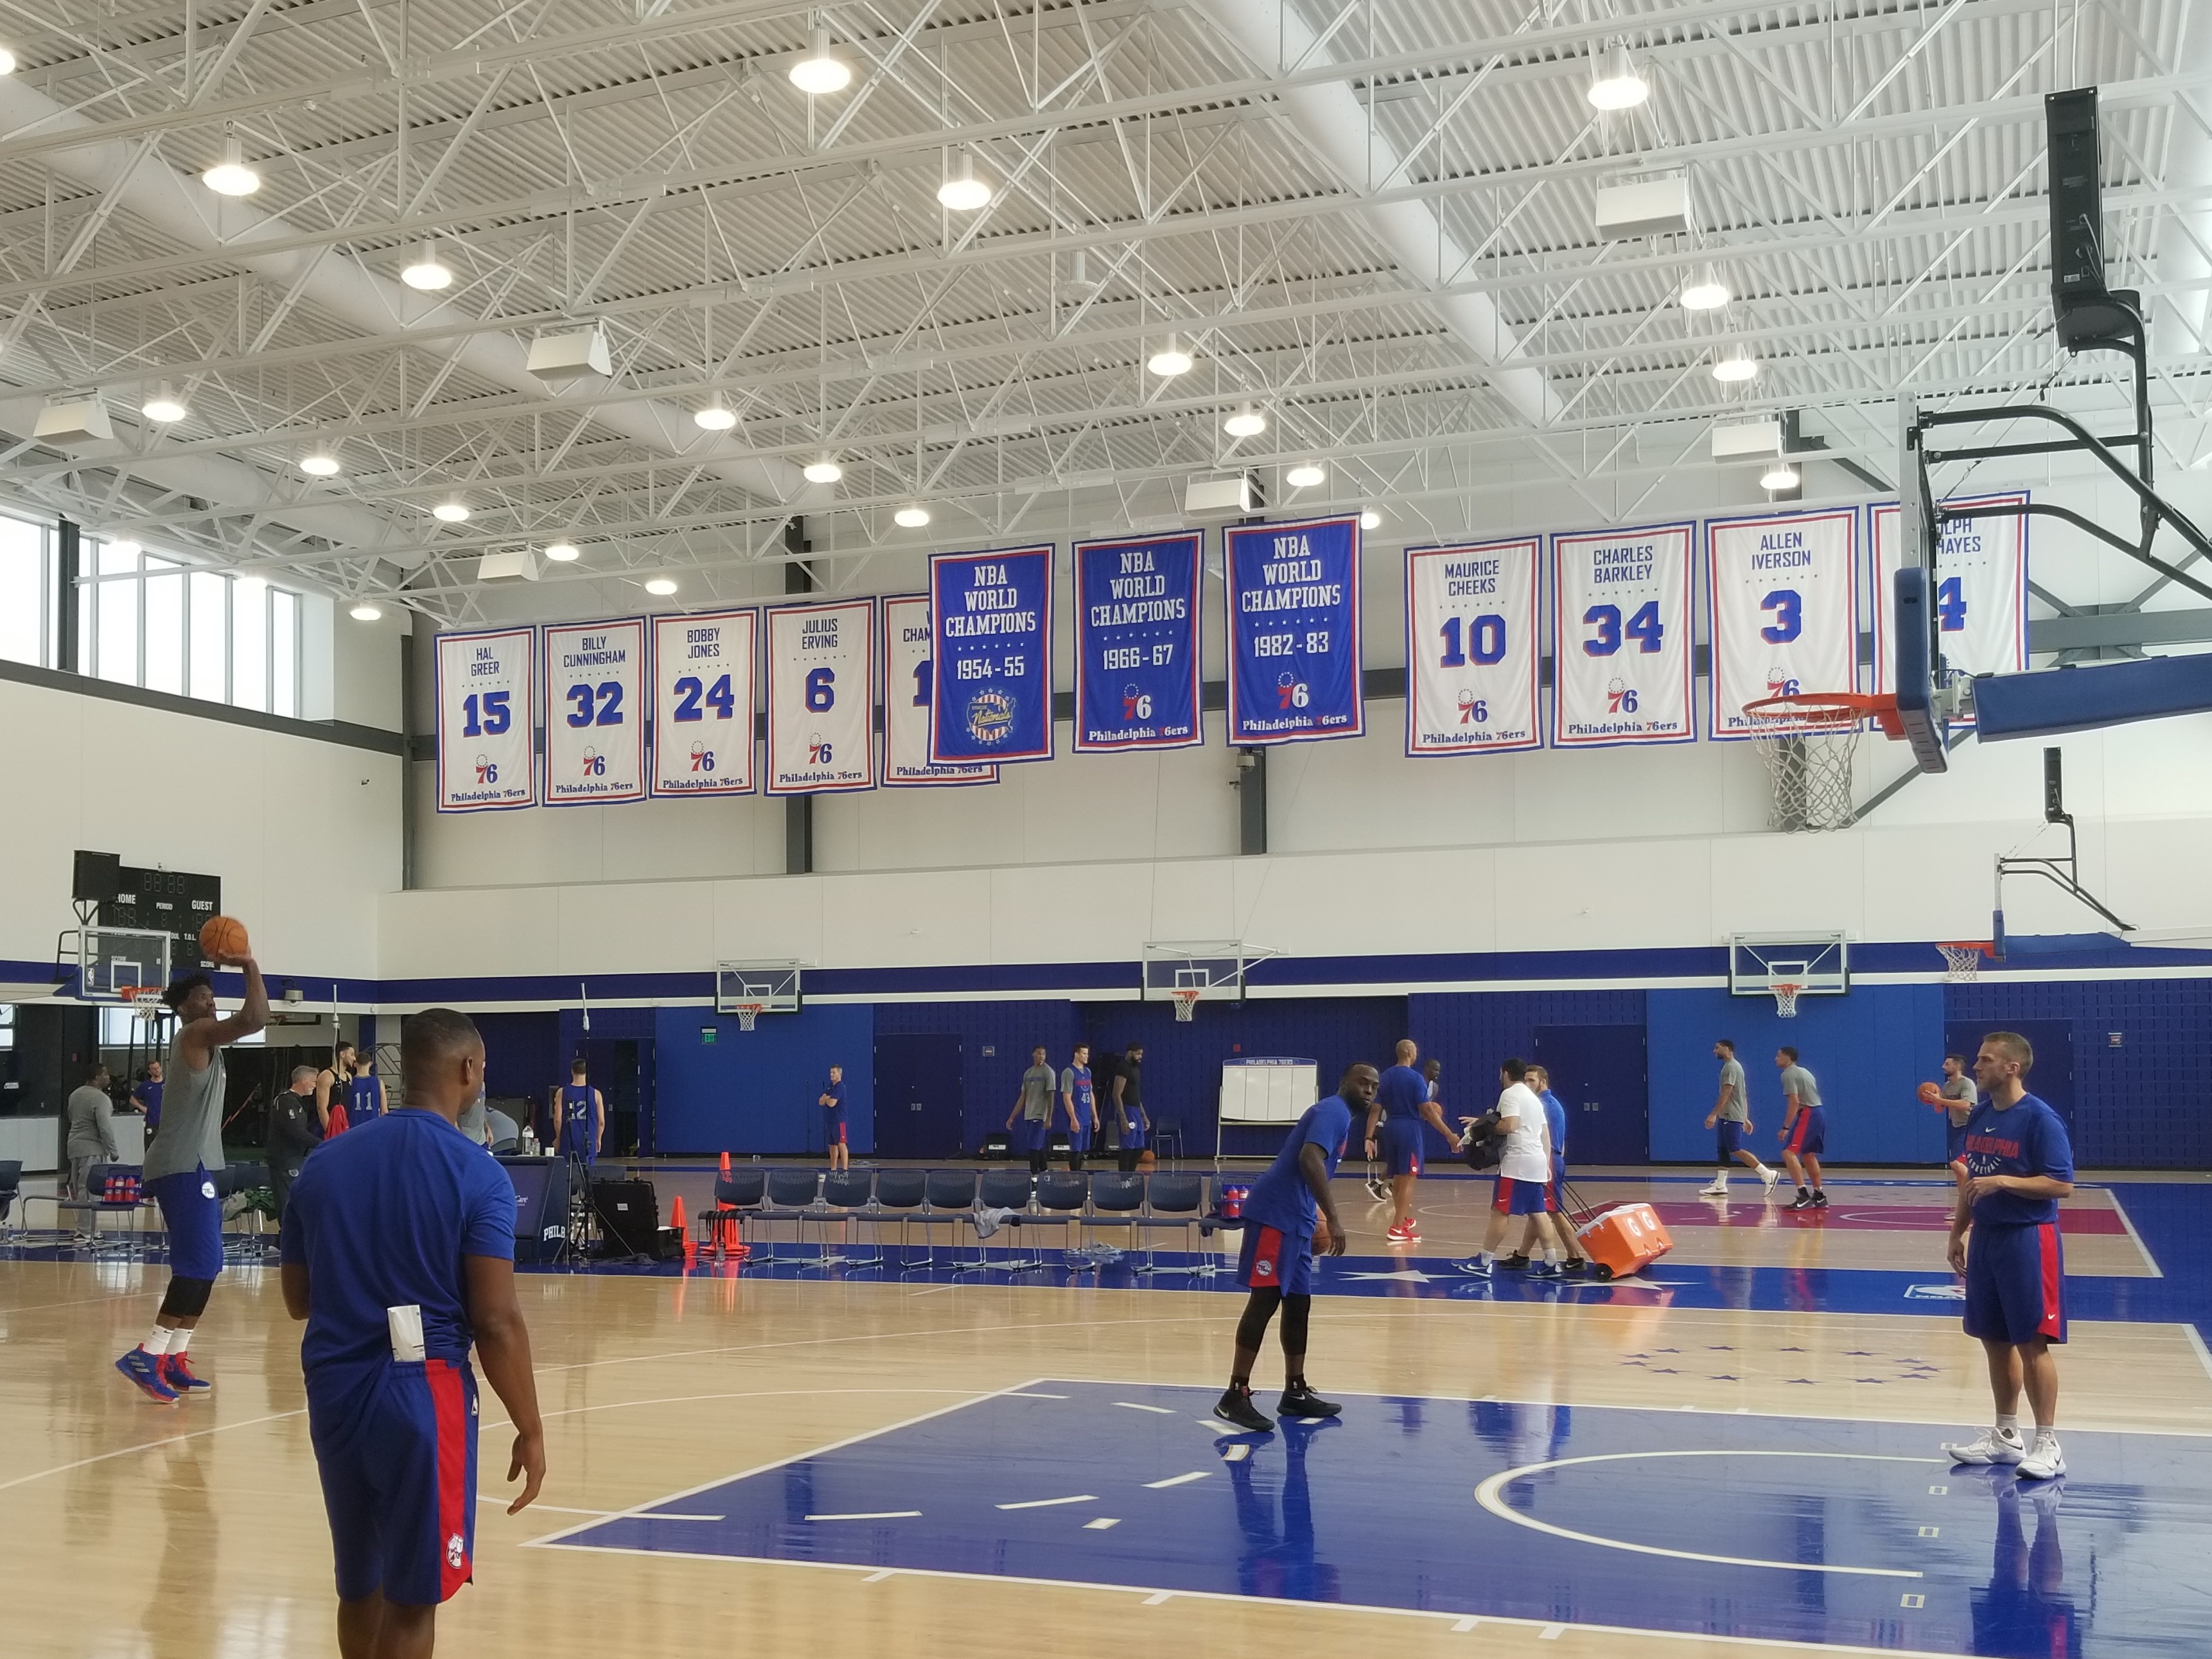 Sixers Notes: Injury Upgrades, Ping-Pong Battles, and Looking “Like a Stick”